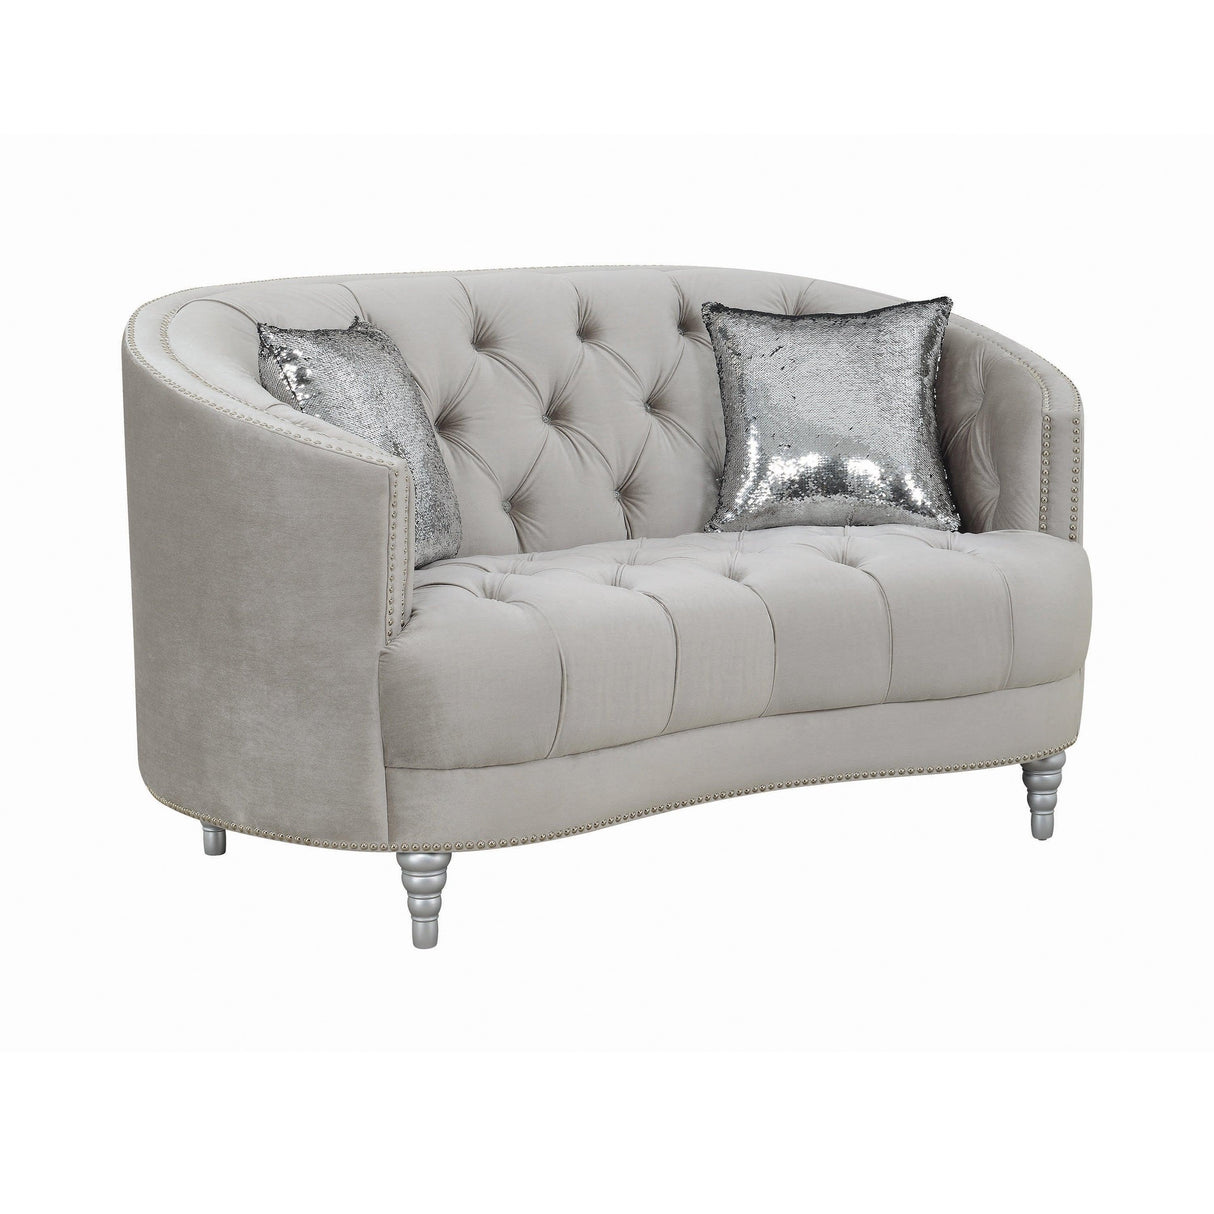 Avonlea Sofa, Loveseat And Chair Grey By Coaster Furniture - Home Elegance USA